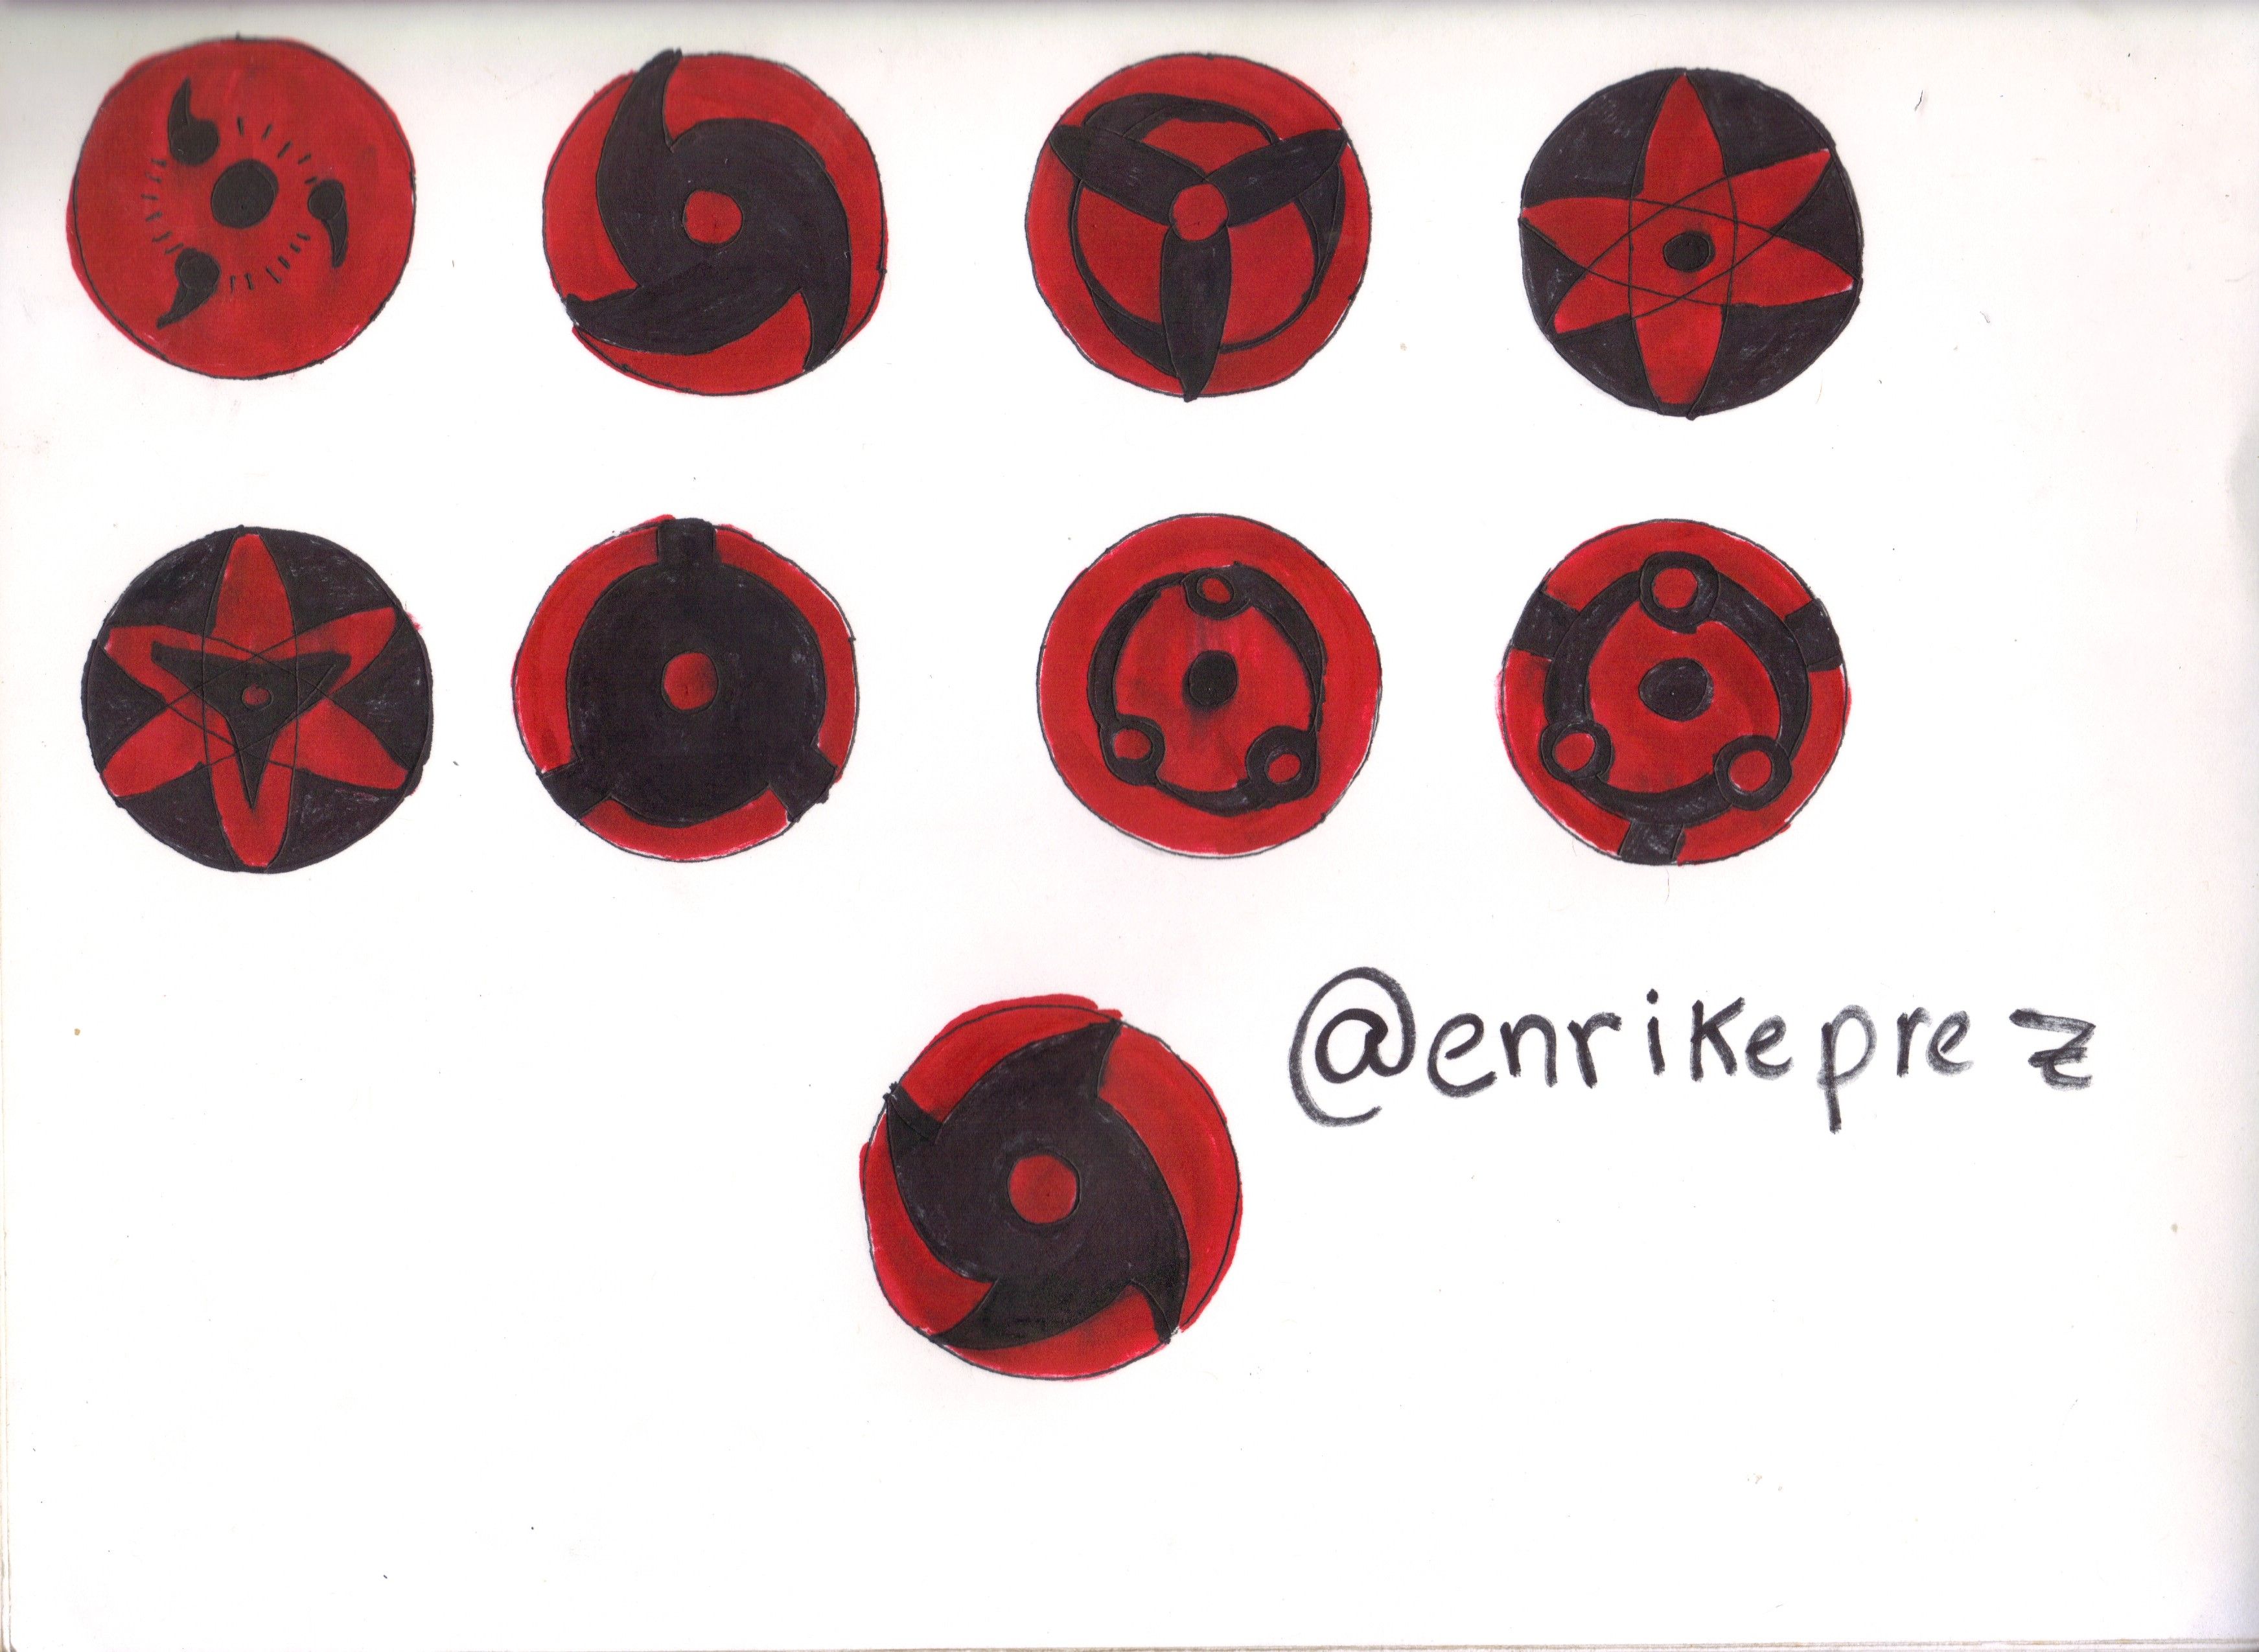 How To Draw Sharingan Eyes Step By Step Sep 16, 2015 · step 1